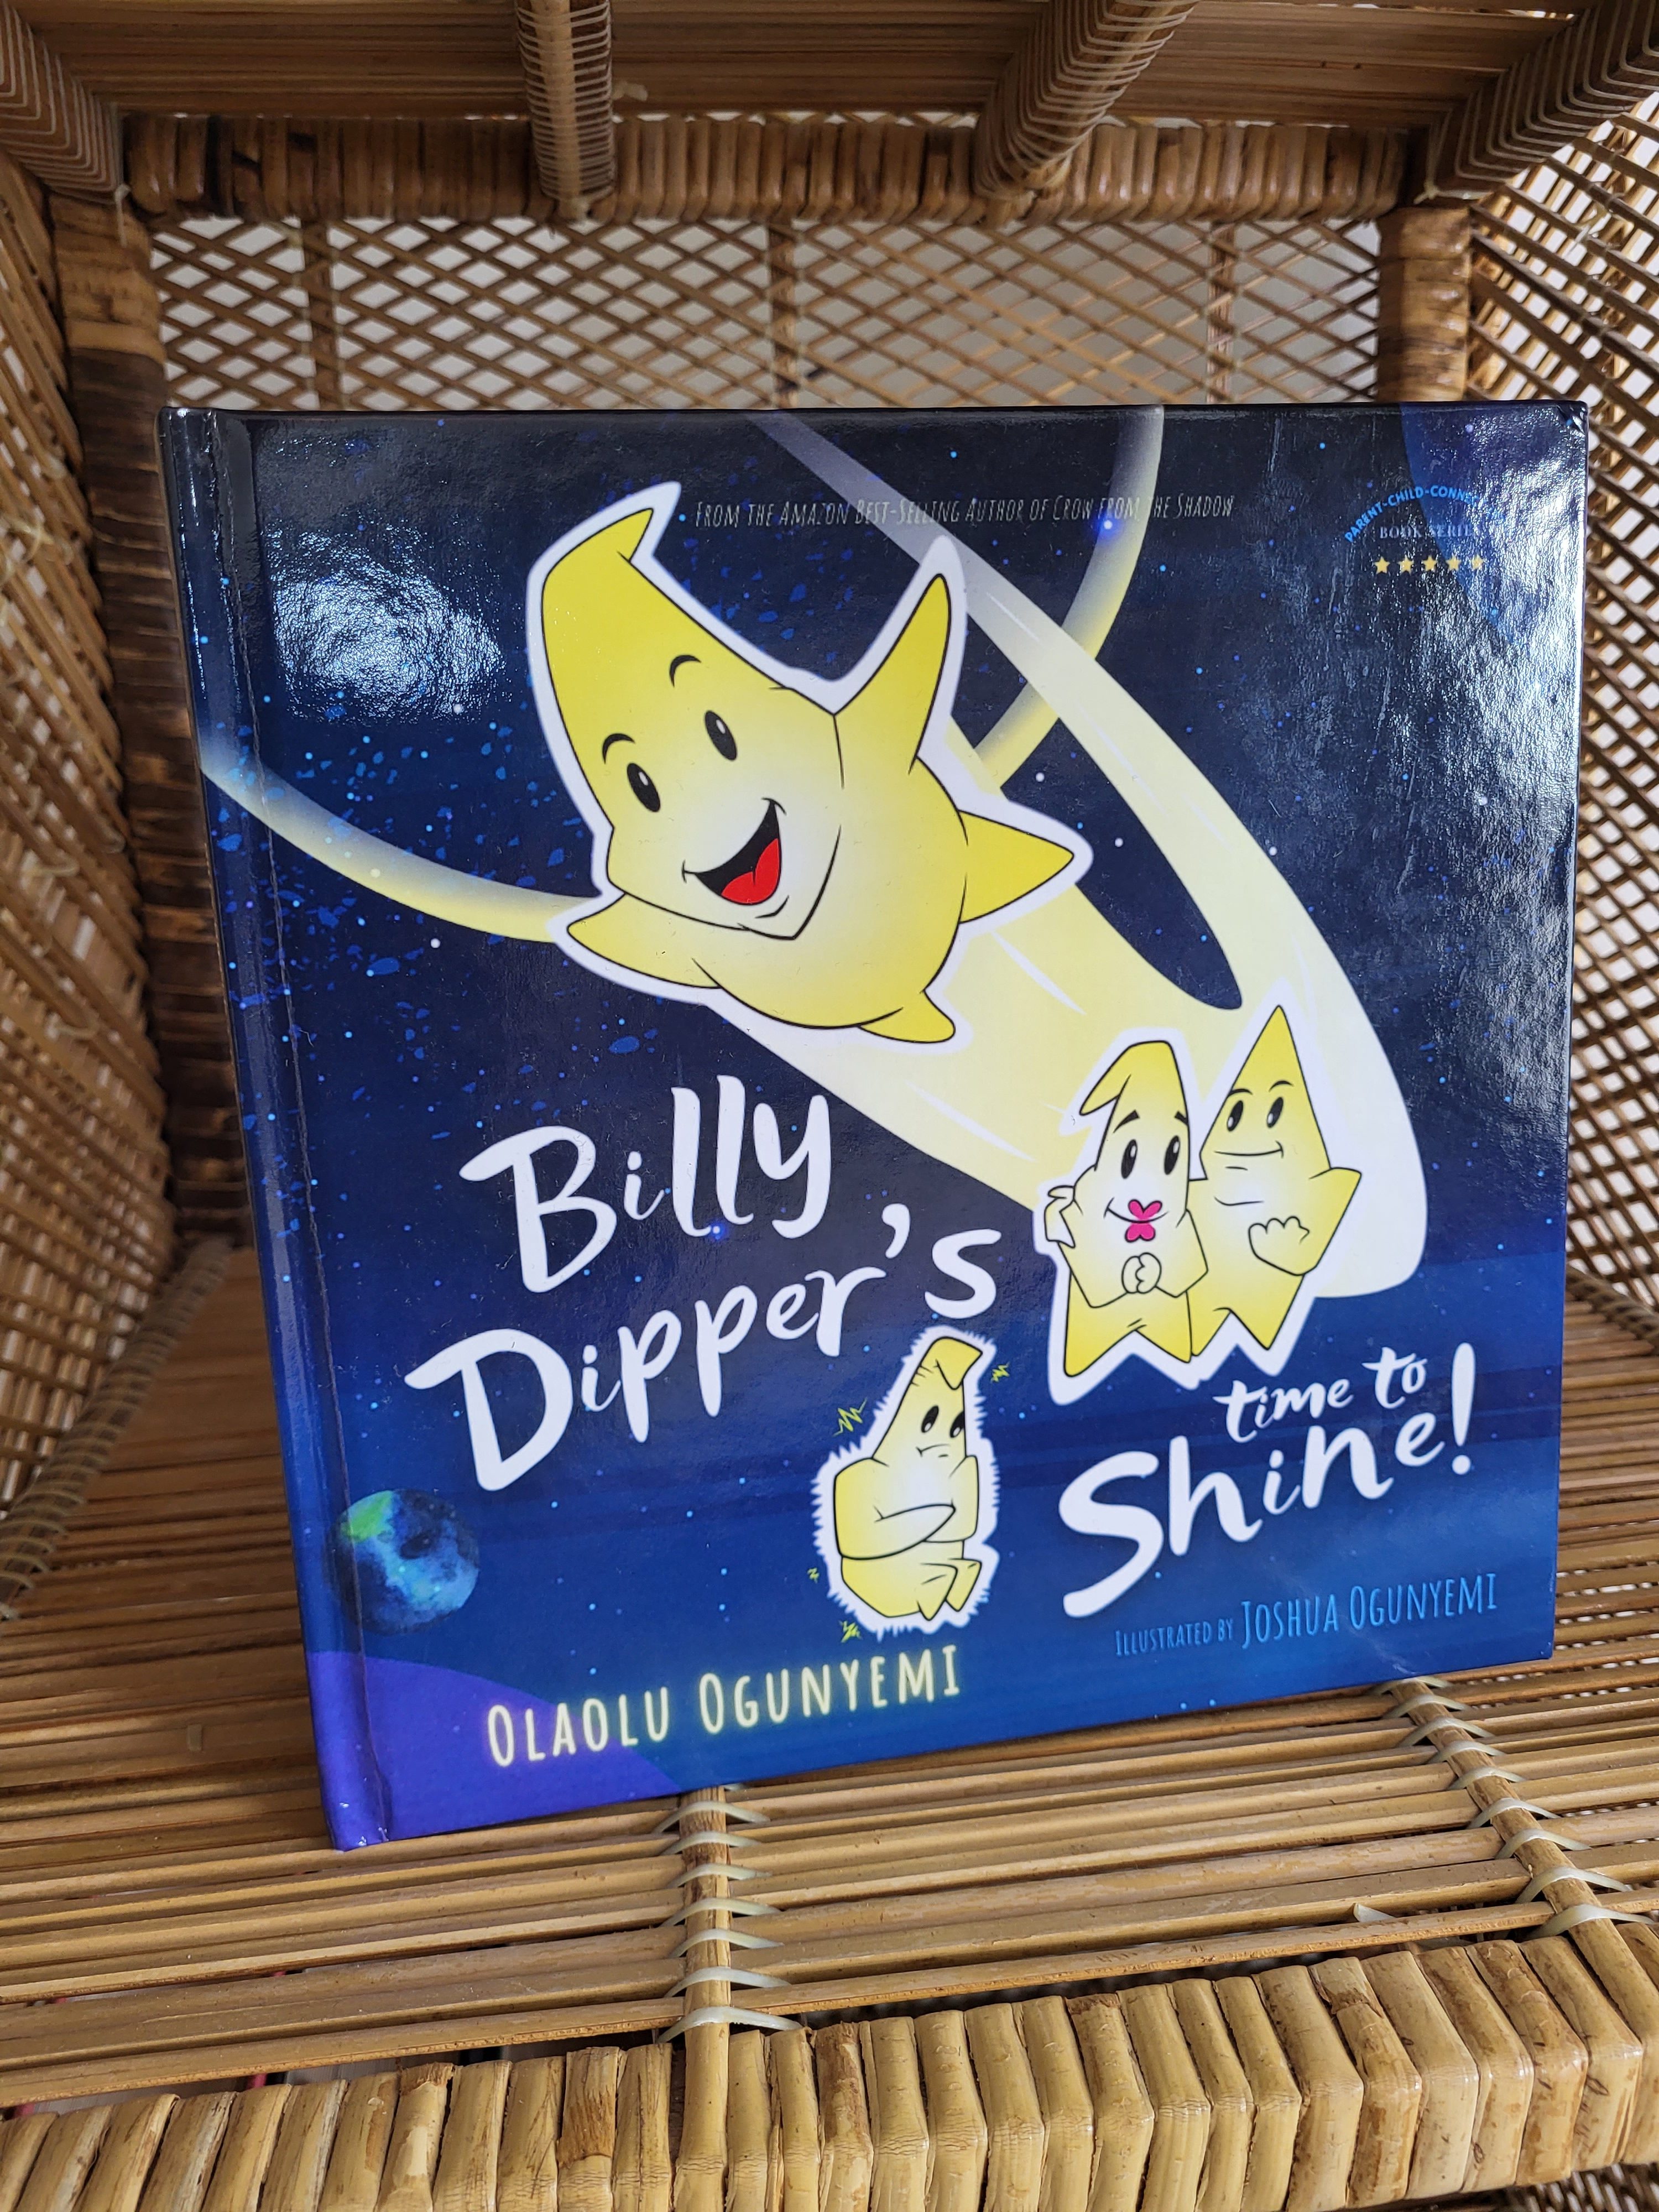 Read along with me!: “Billy Dipper’s Time to Shine” by Olaolu Ogunyemi